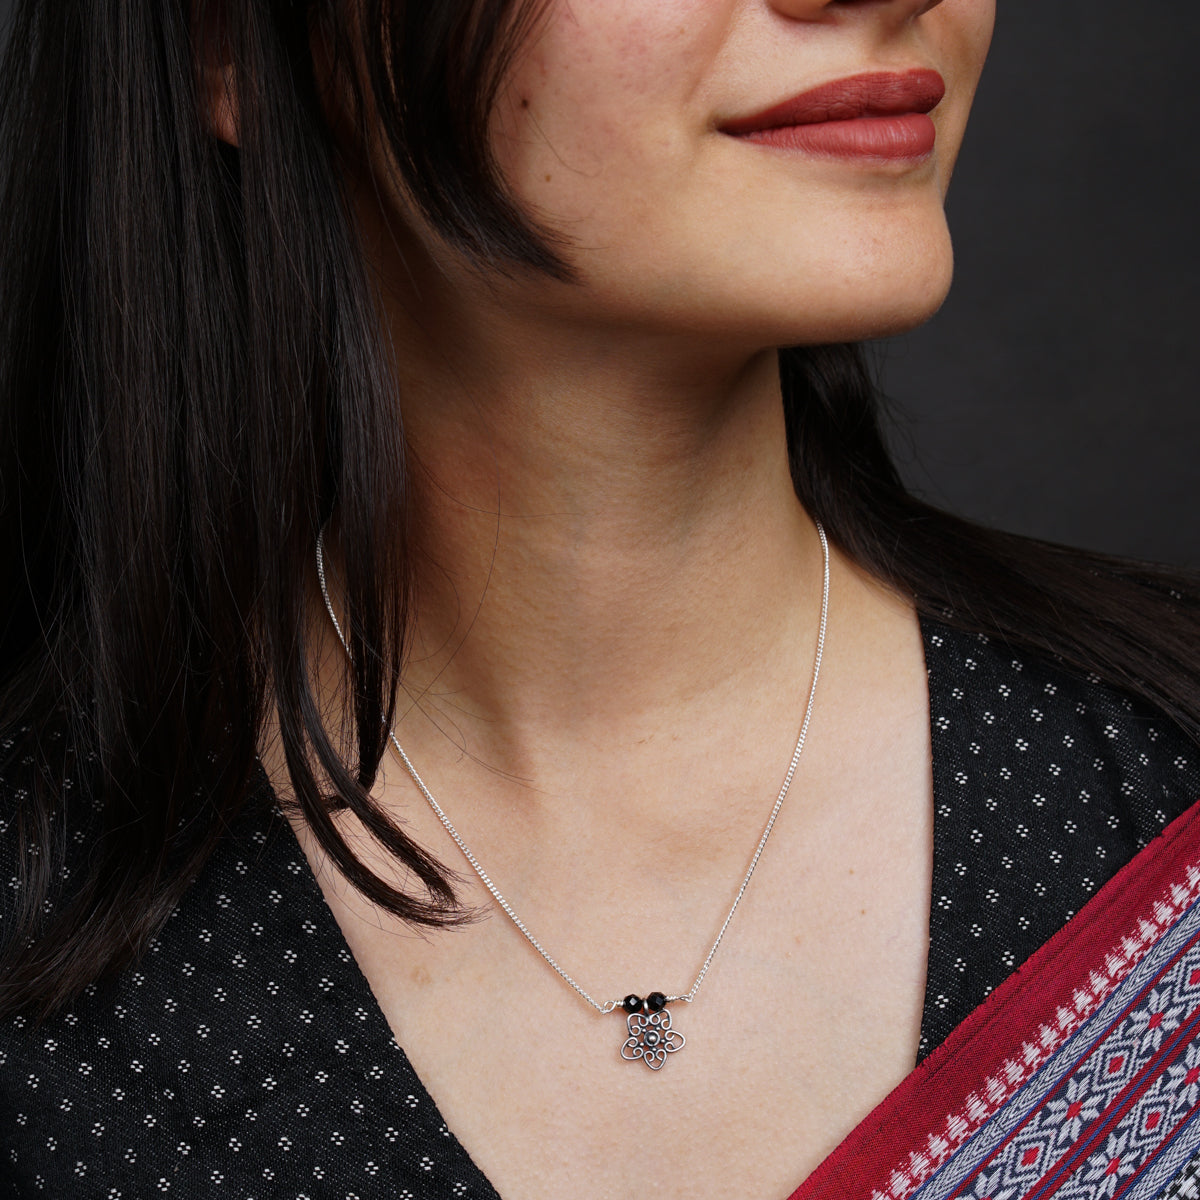 a woman wearing a necklace with a flower on it